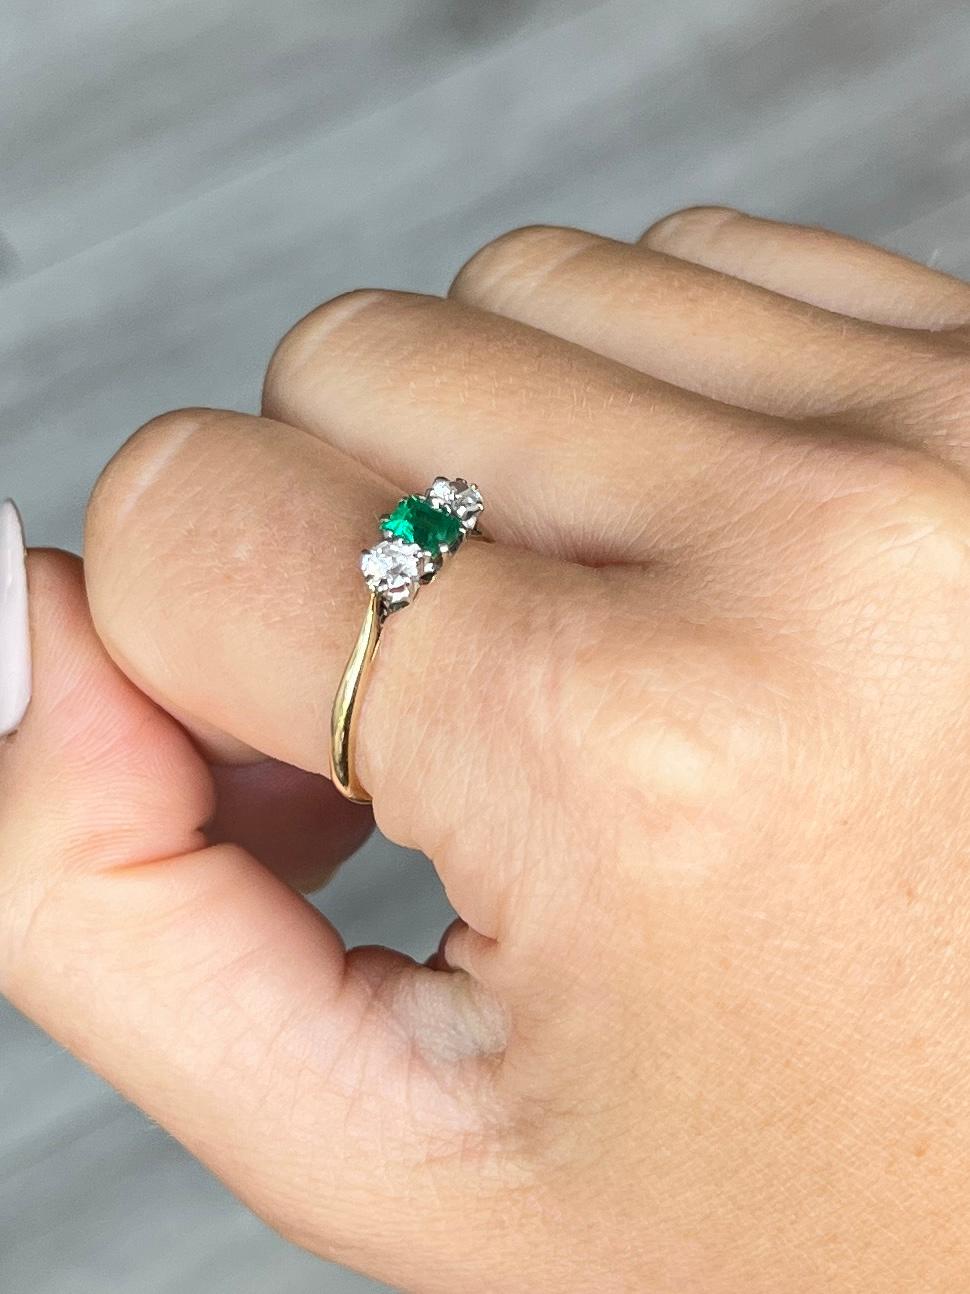 The central emerald is so bright and beautiful and measures 45pts. Sat either side it are two bright shimmering old European cut diamonds each measuring 15pts each. The ring is modelled in 18ct gold.

Ring Size: Q or 8 1/4 
Height Off Finger: